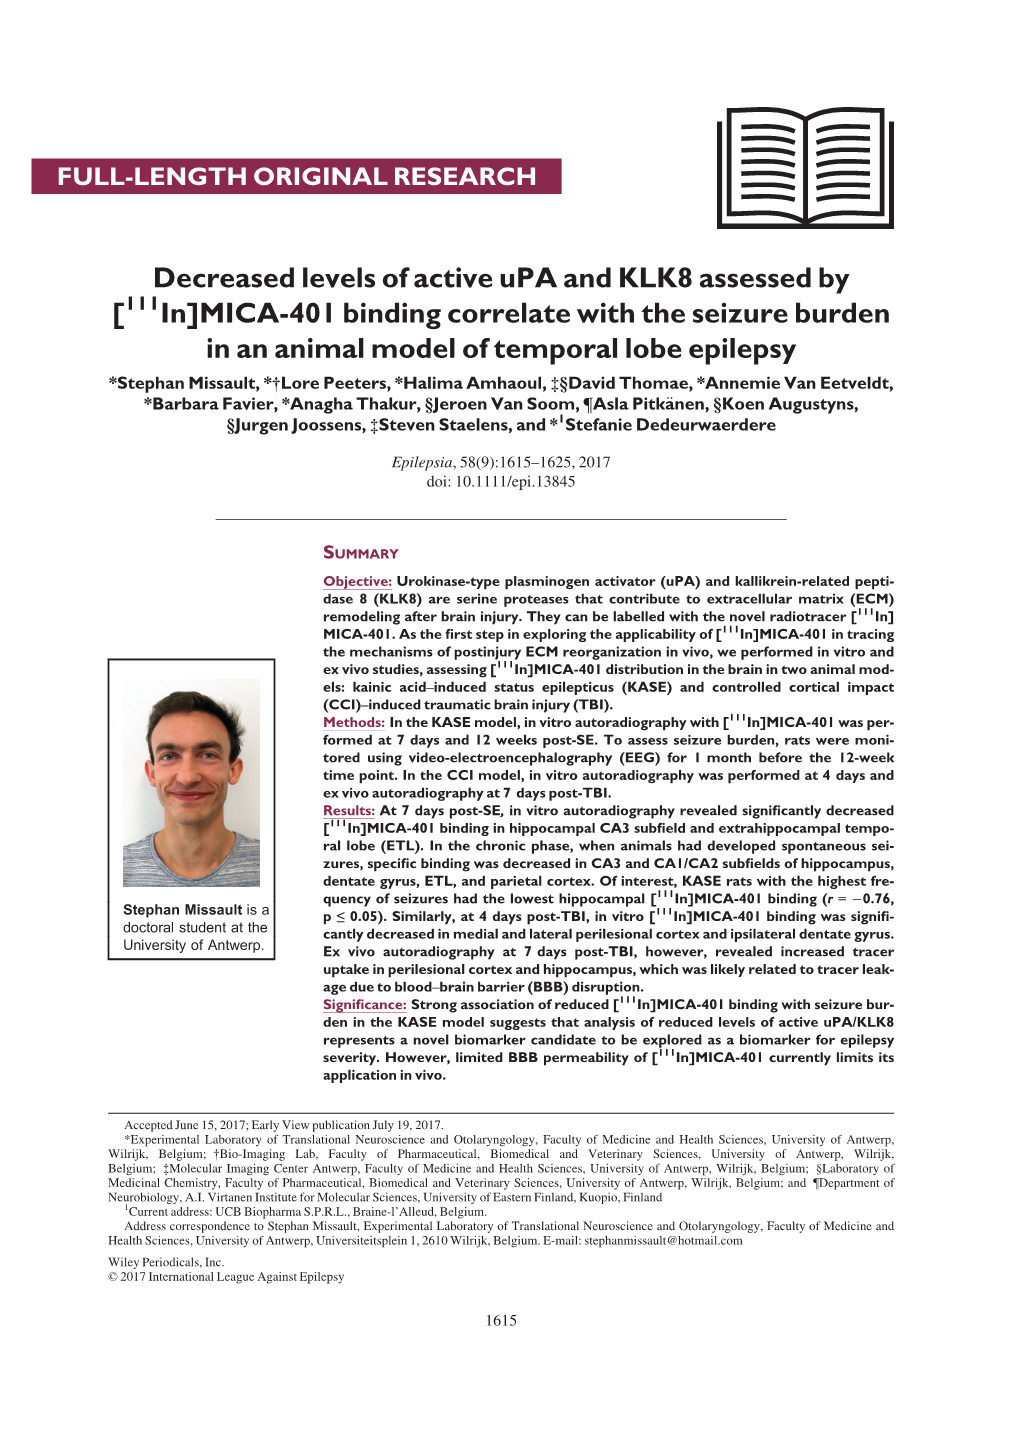 Decreased Levels of Active Upa and KLK8 Assessed by [ In